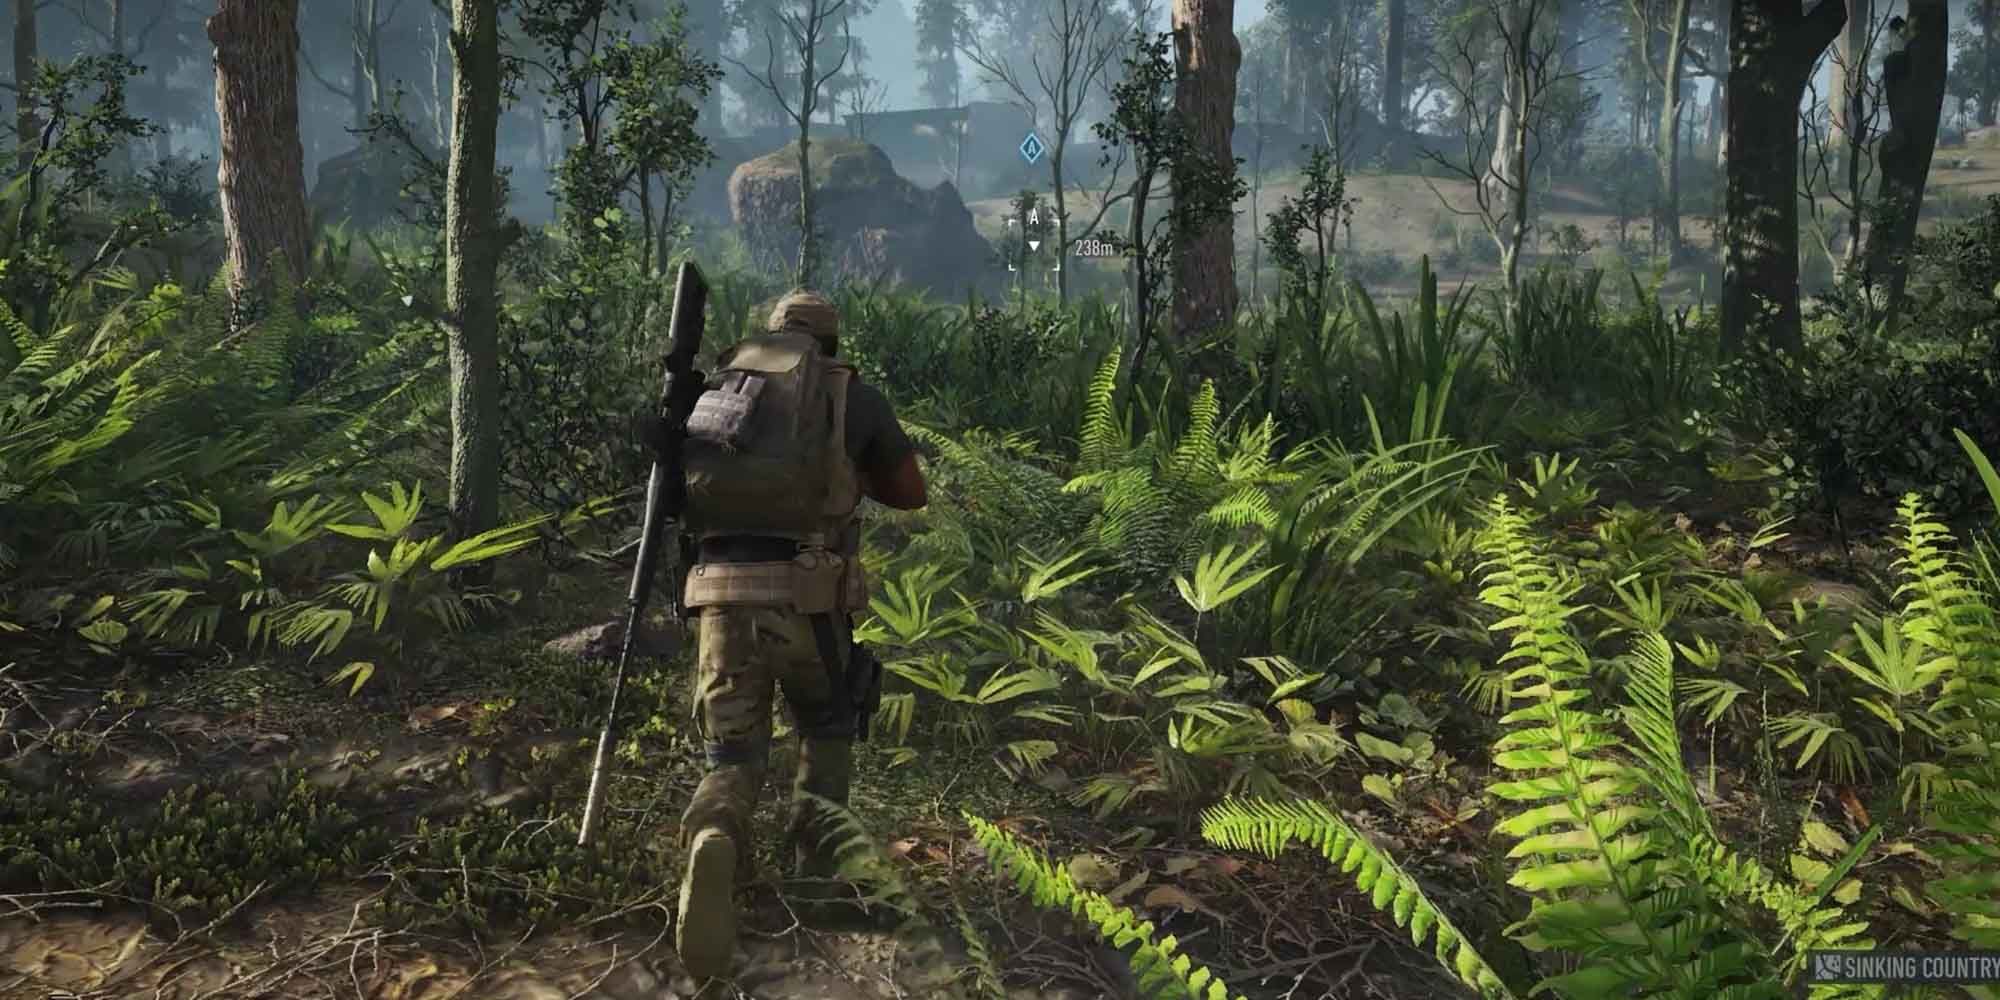 Running through a forest in Ghost Recon Breakpoint